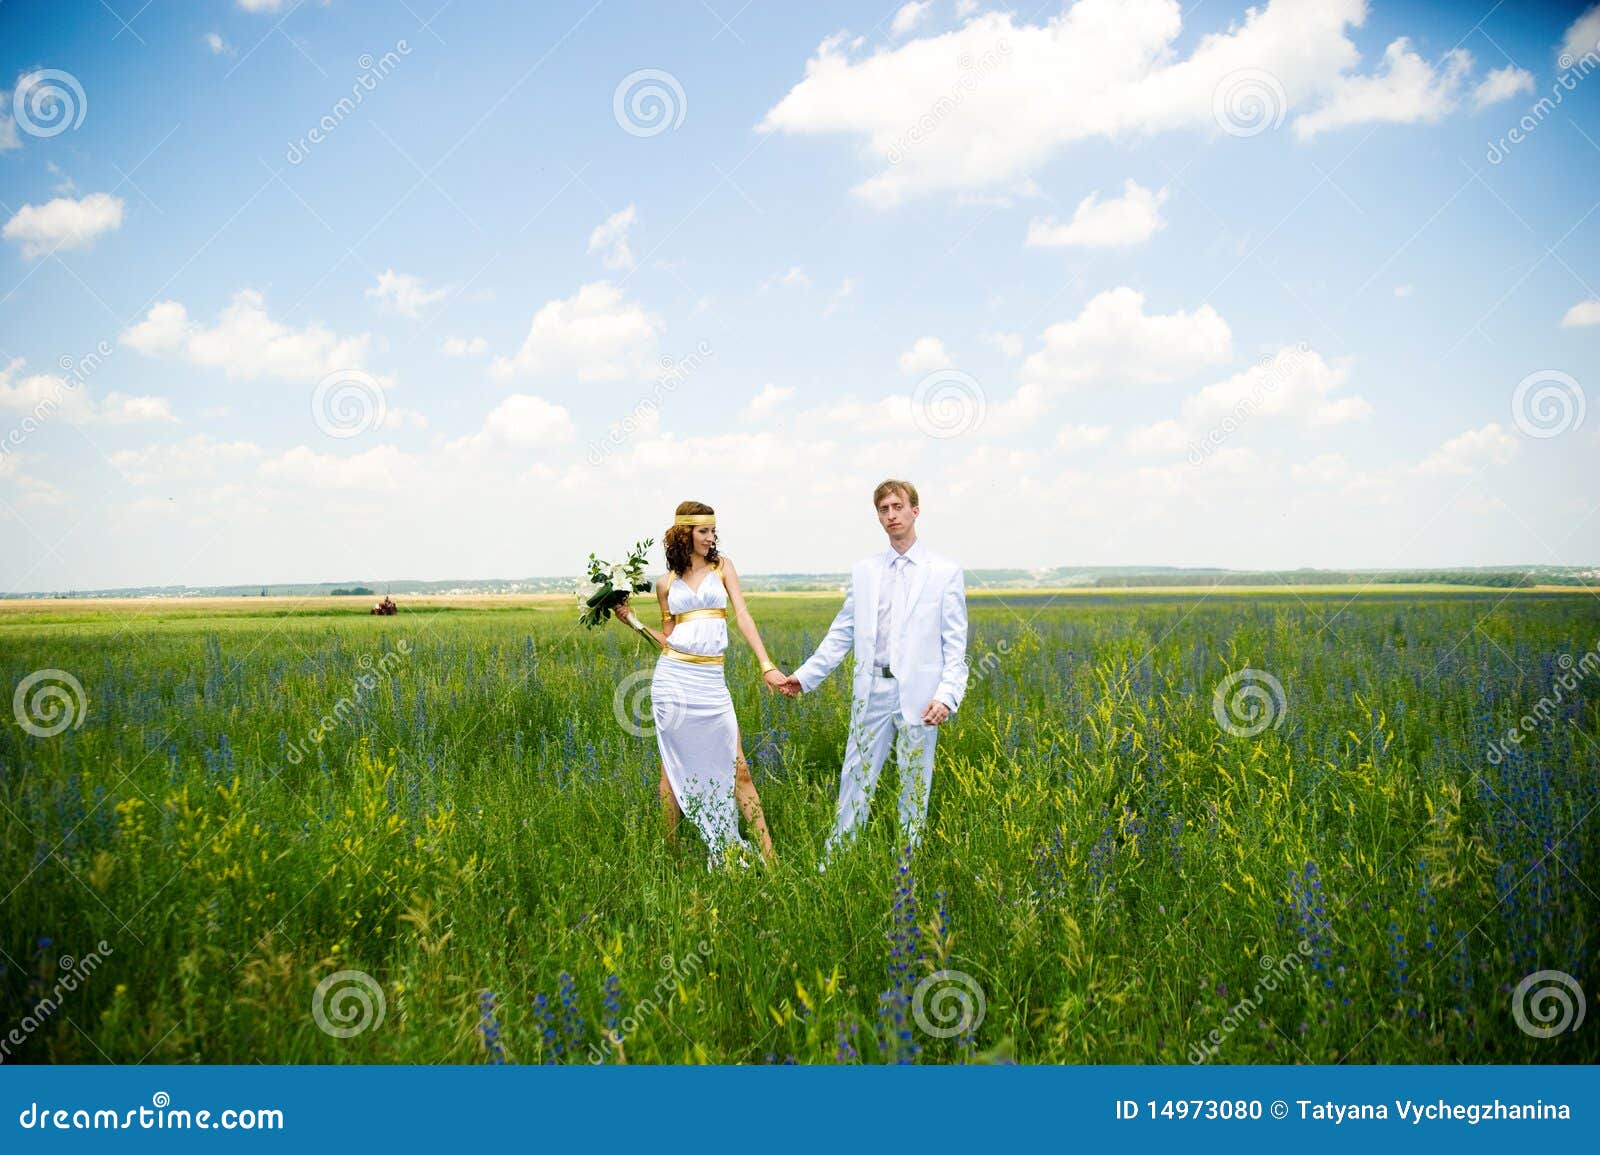 Just Married Couple On The Nature Stock Photo - Image: 14973080